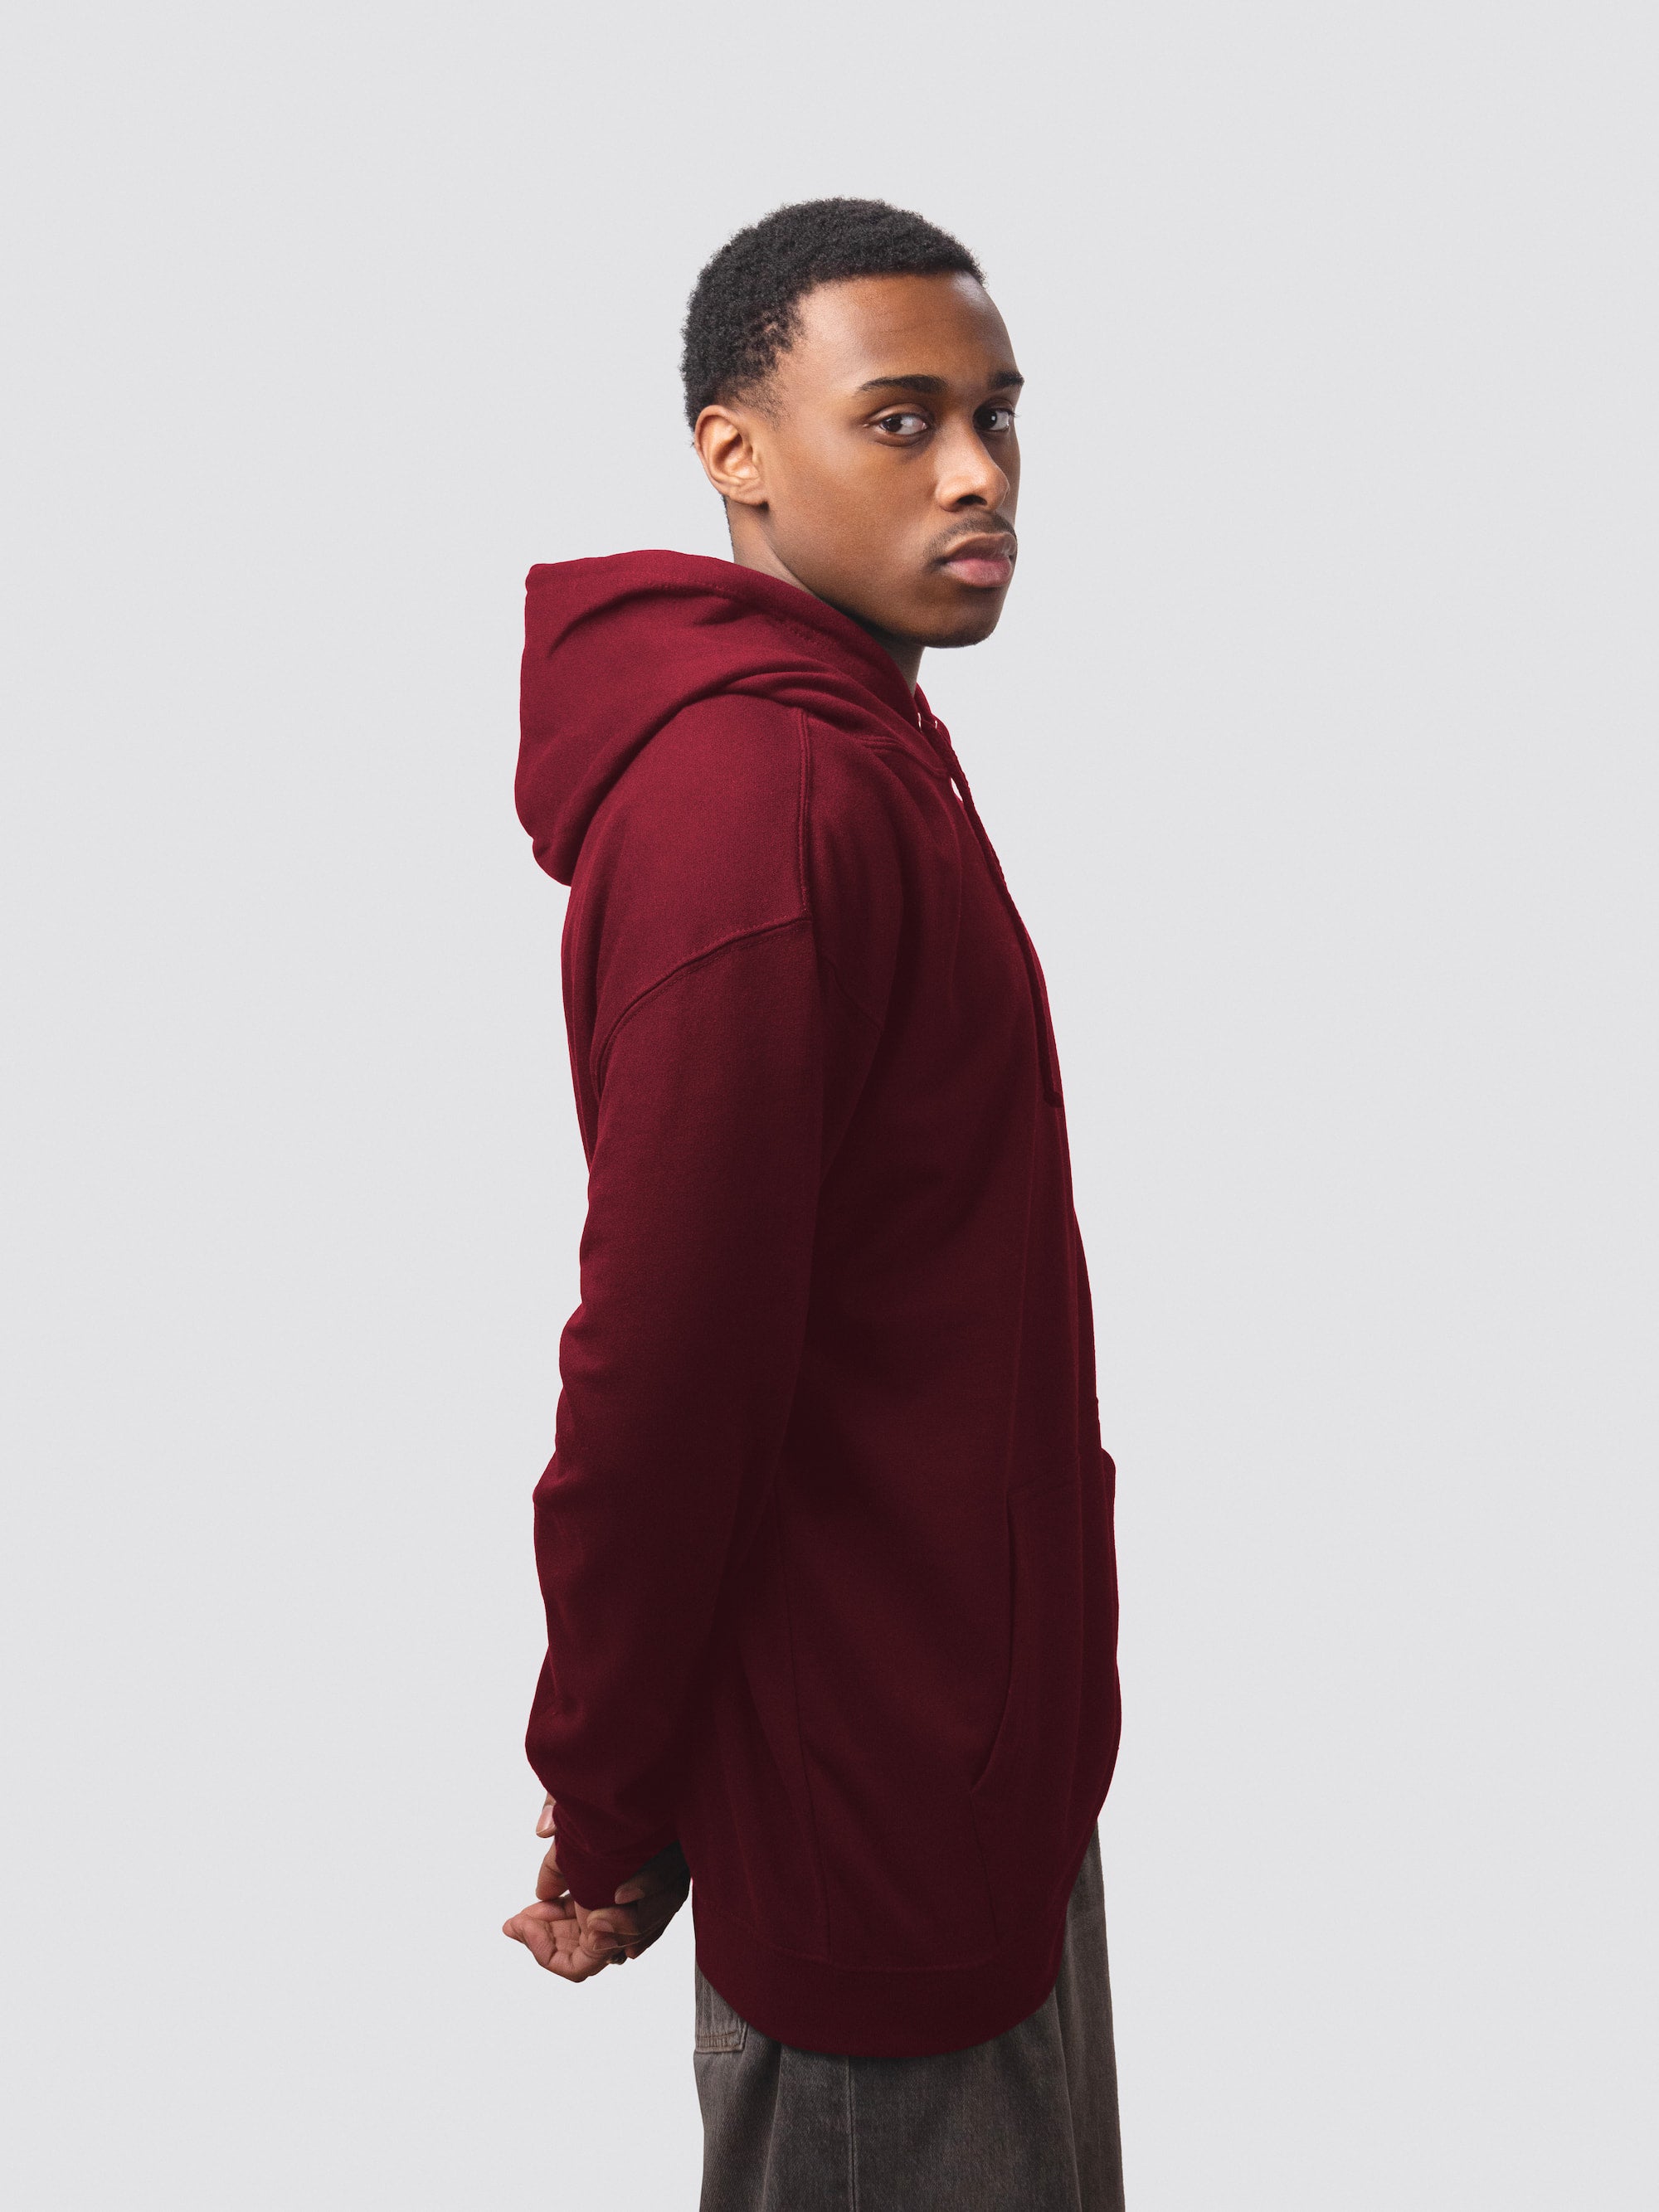 Castle MCR College hoodie, made from burgundy cotton-faced fabric